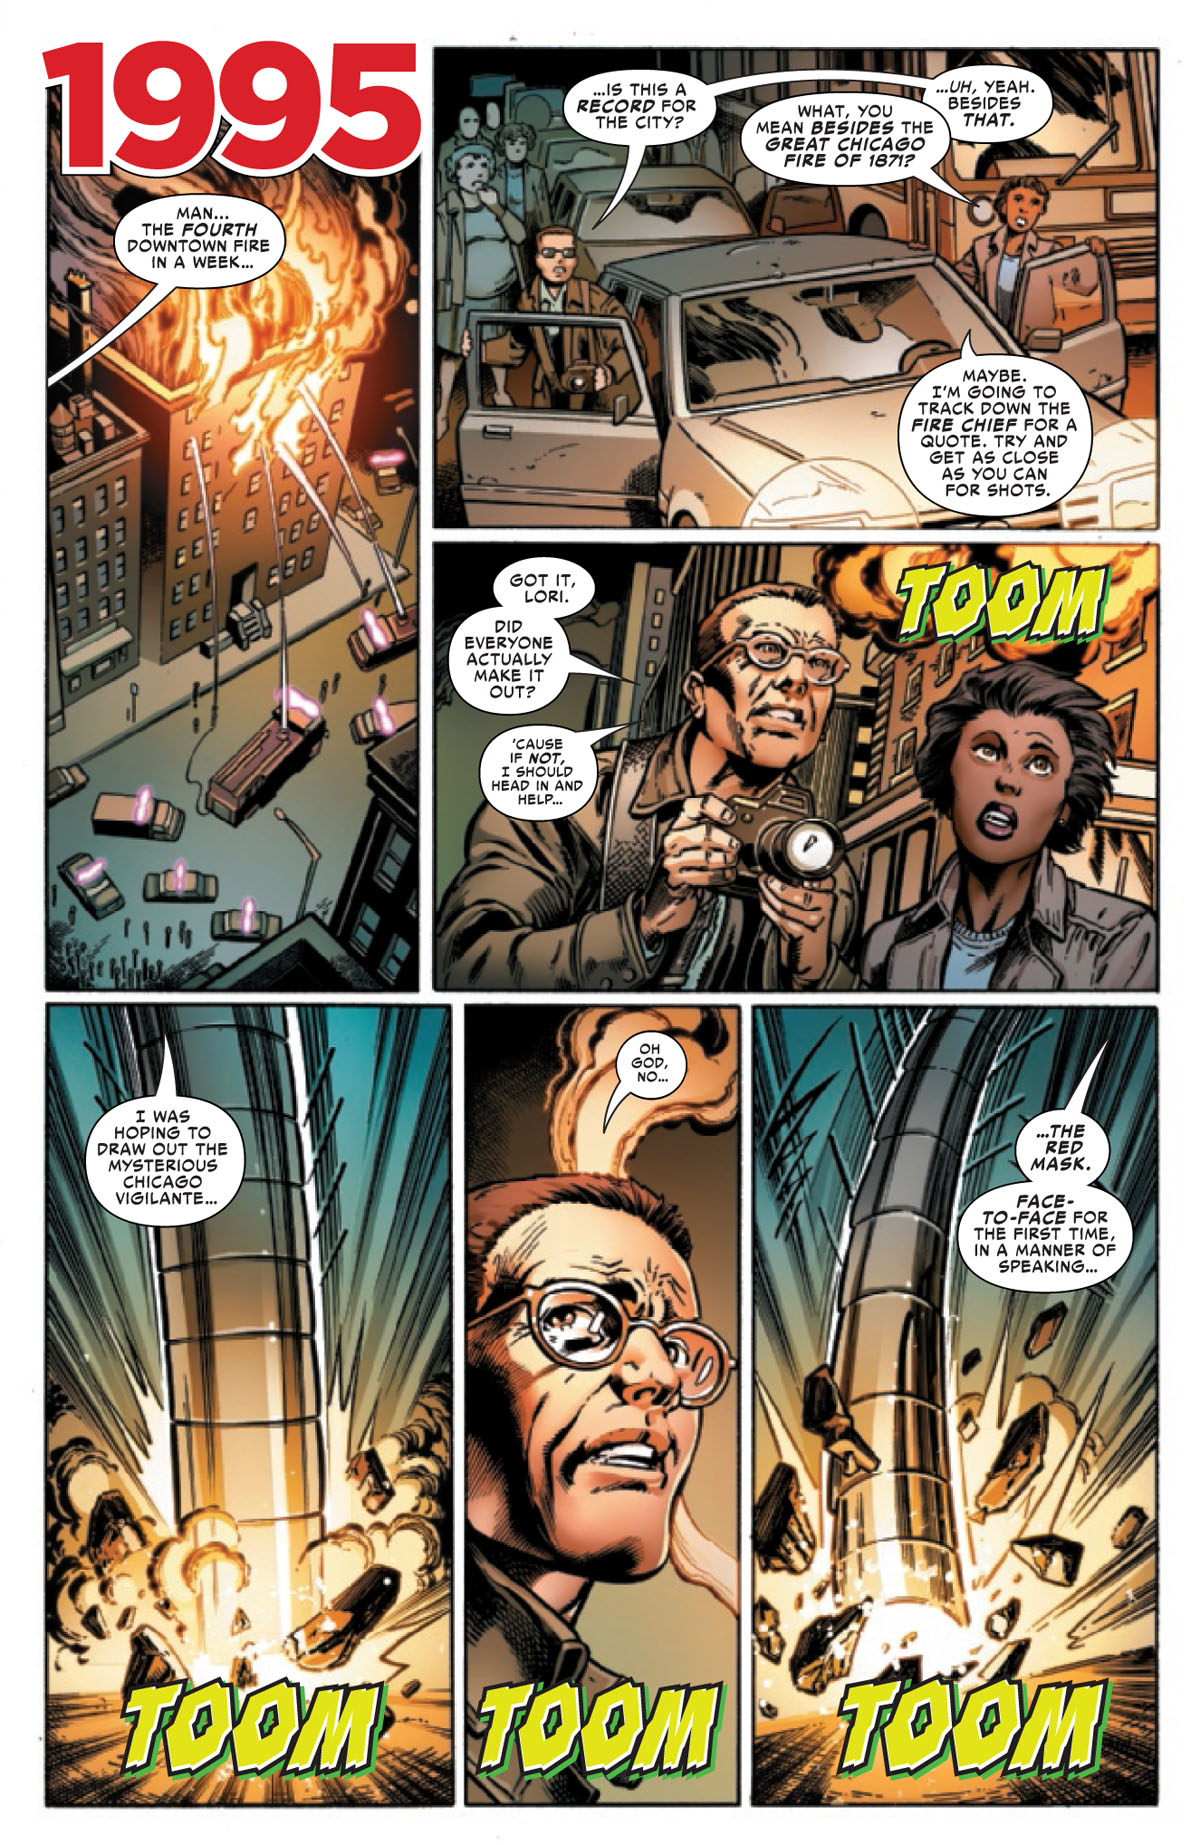 Spider-Man: Life Story #4 page 1